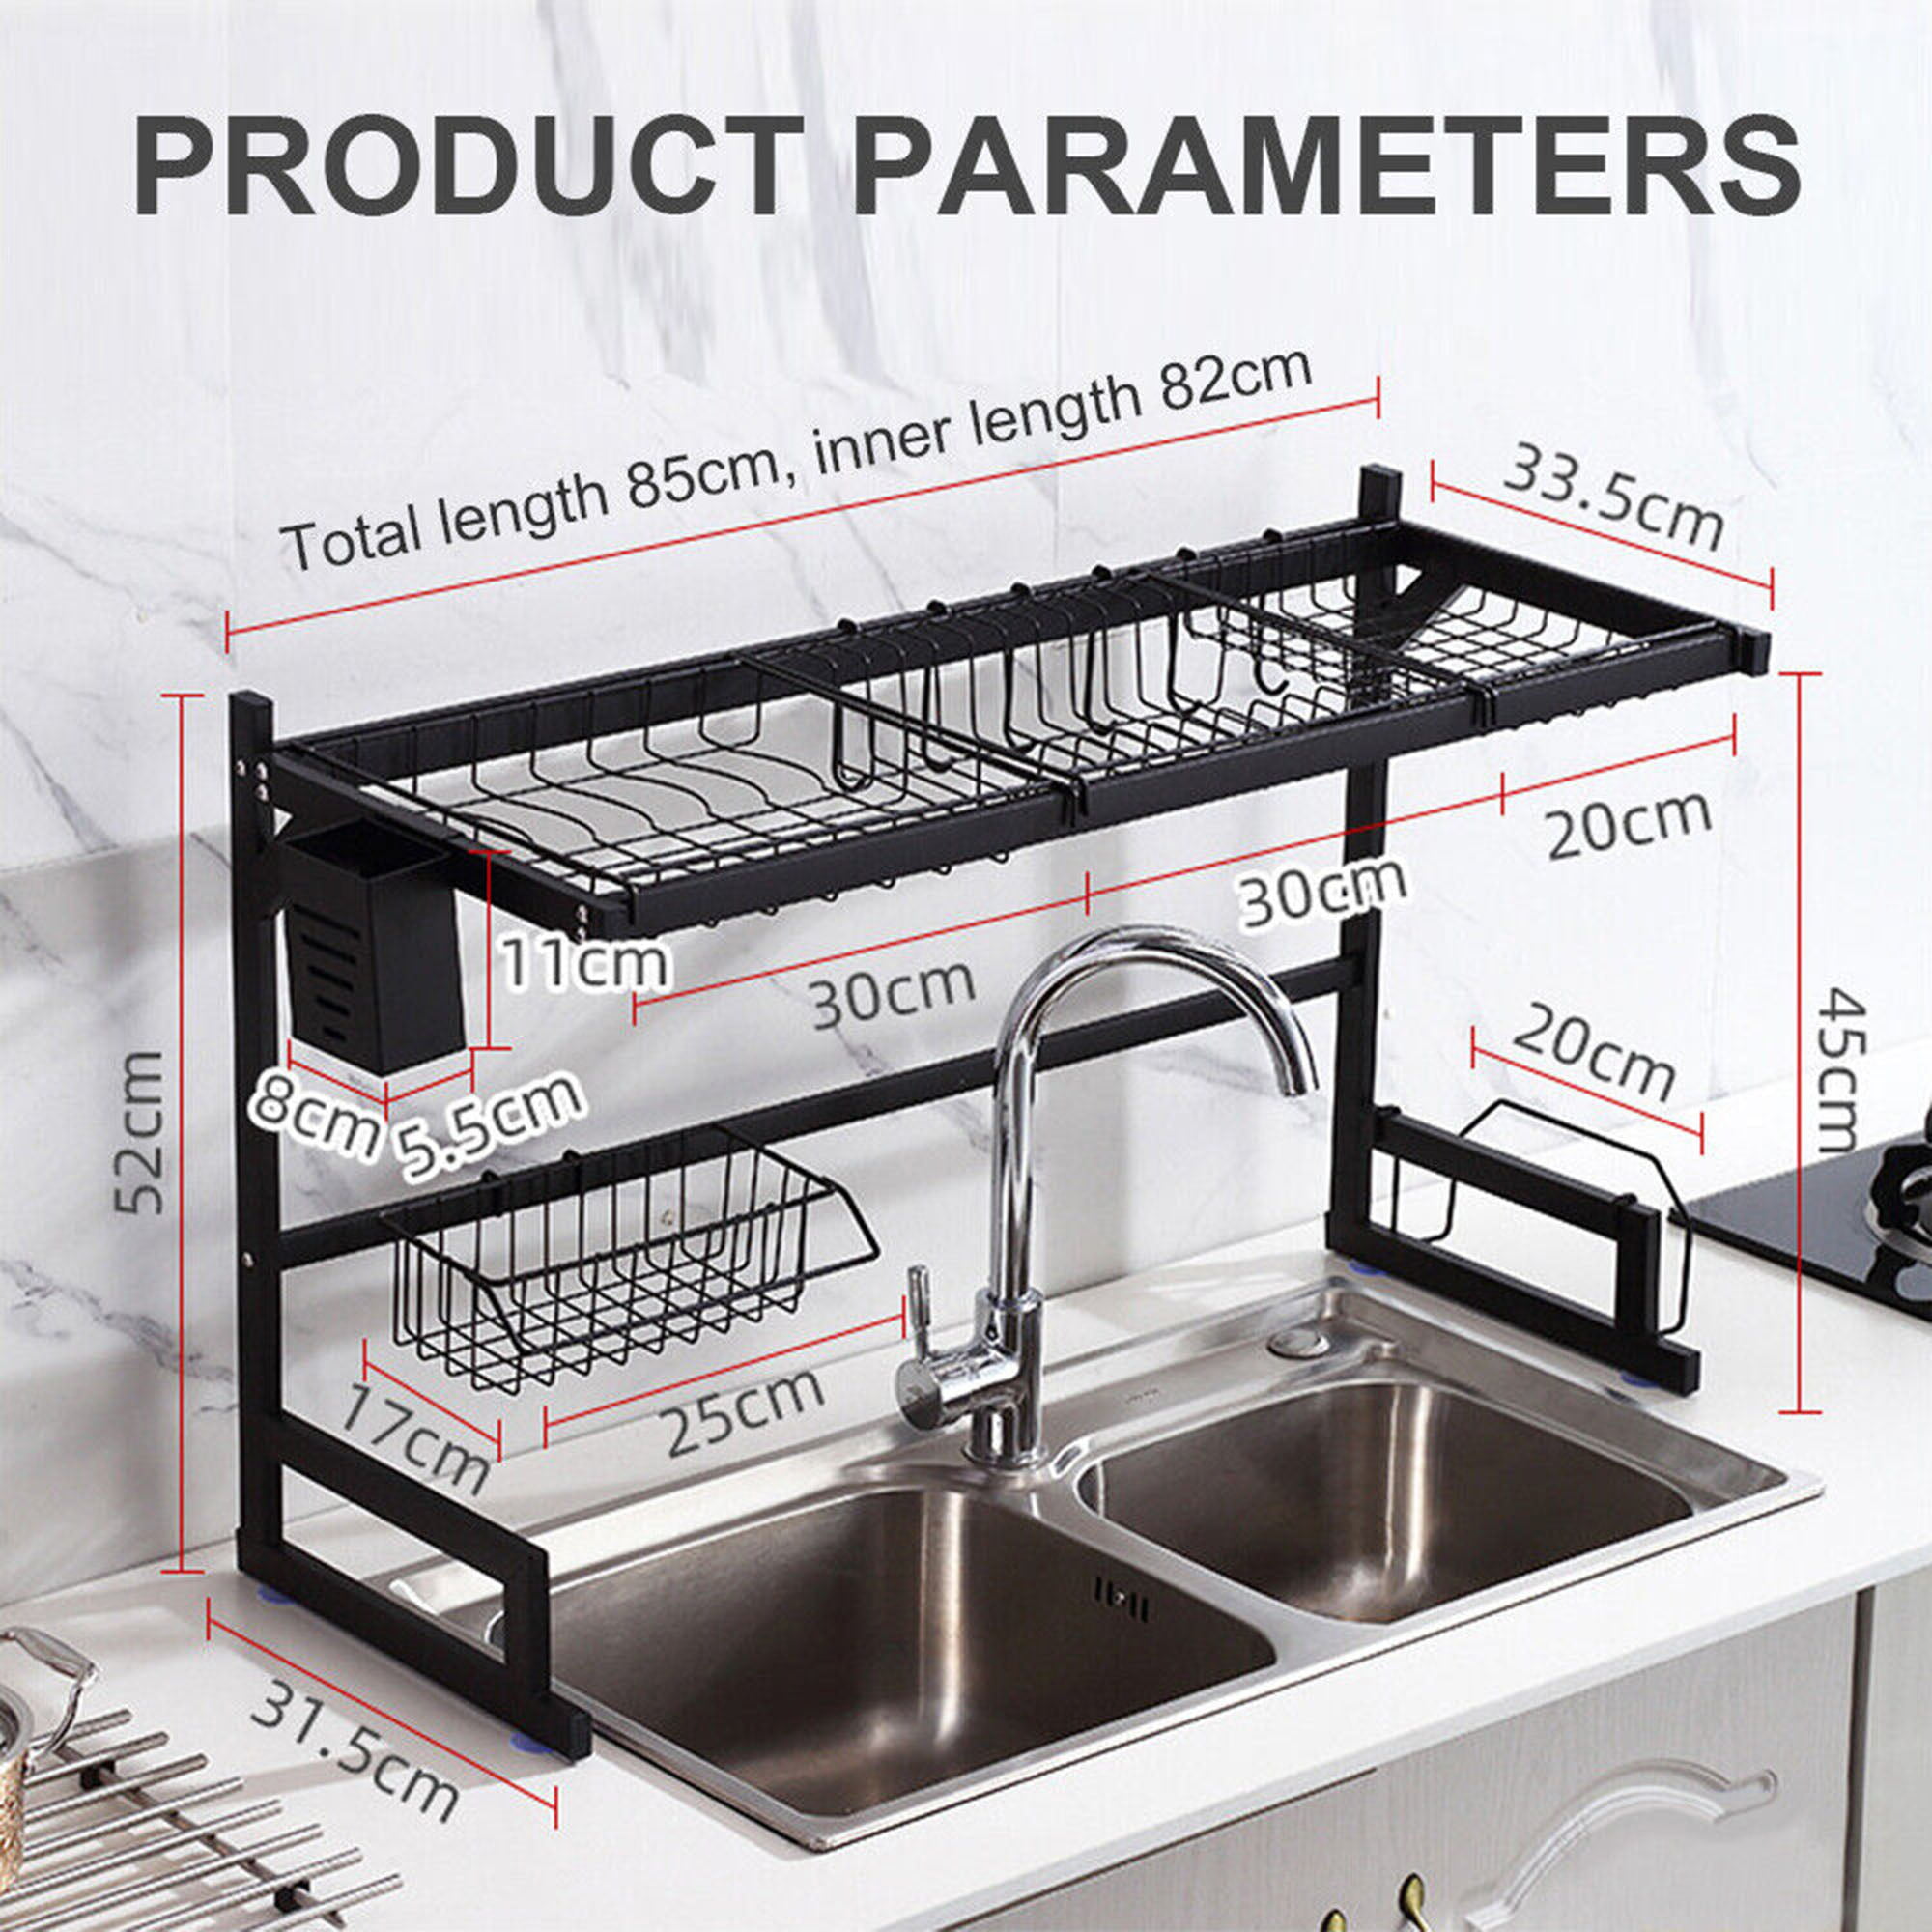 Yodudm 2 Tier 23.6-37.8 Inch Width Adjustable Over The Sink Dish Drying Rack  Stainless Steel Kitchen Storage Shelf Matte Black Pan Organizer Space Saver  with Utensils Holder Knife Stand Hooks 